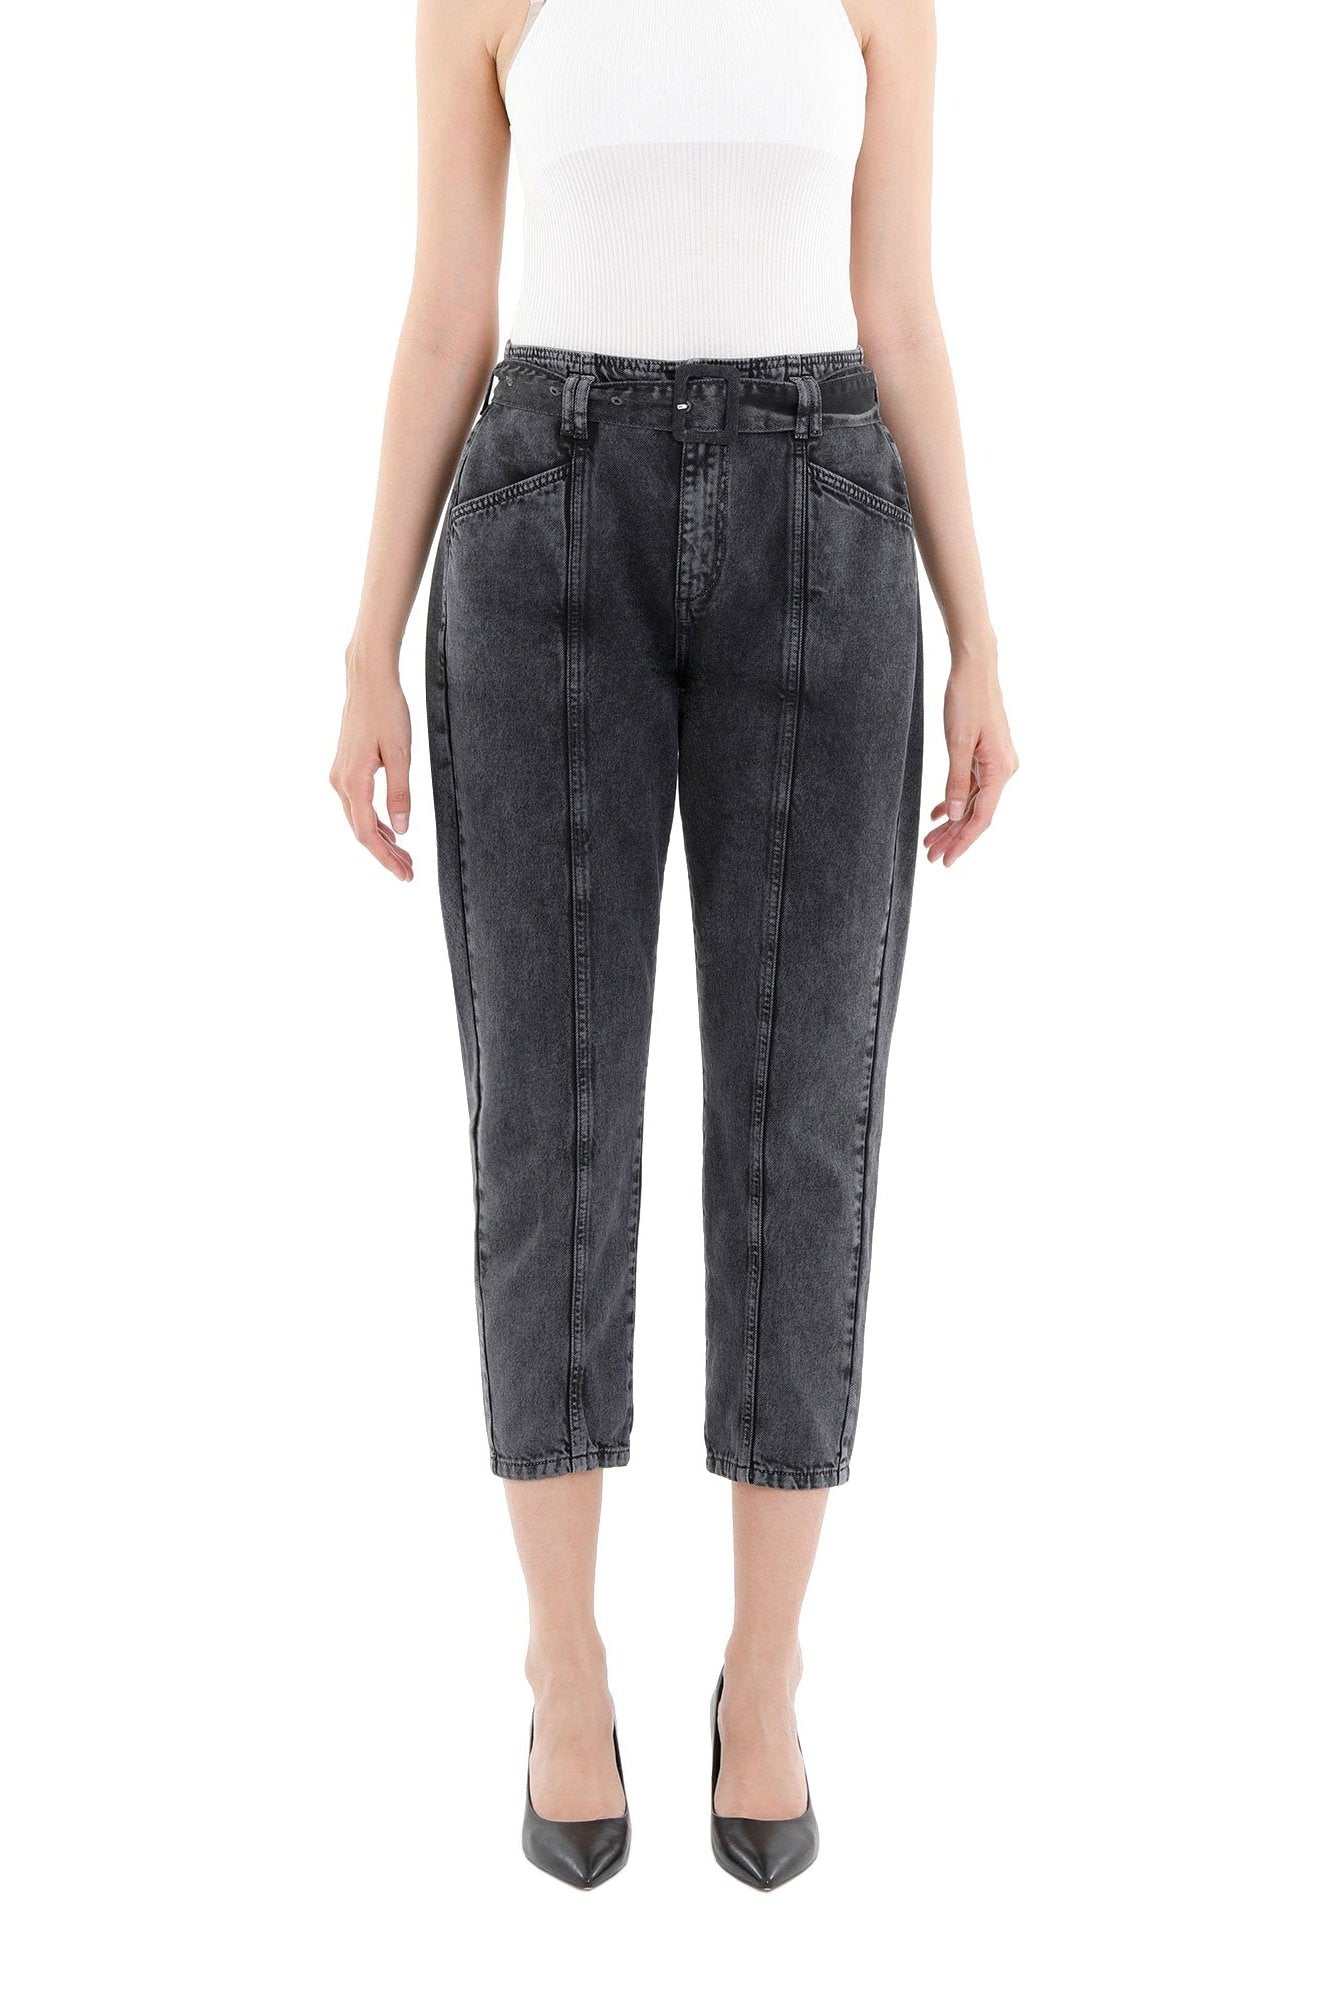 Tapered Black Jeans for Women Carrot Jeans with Jean Belt G-Line